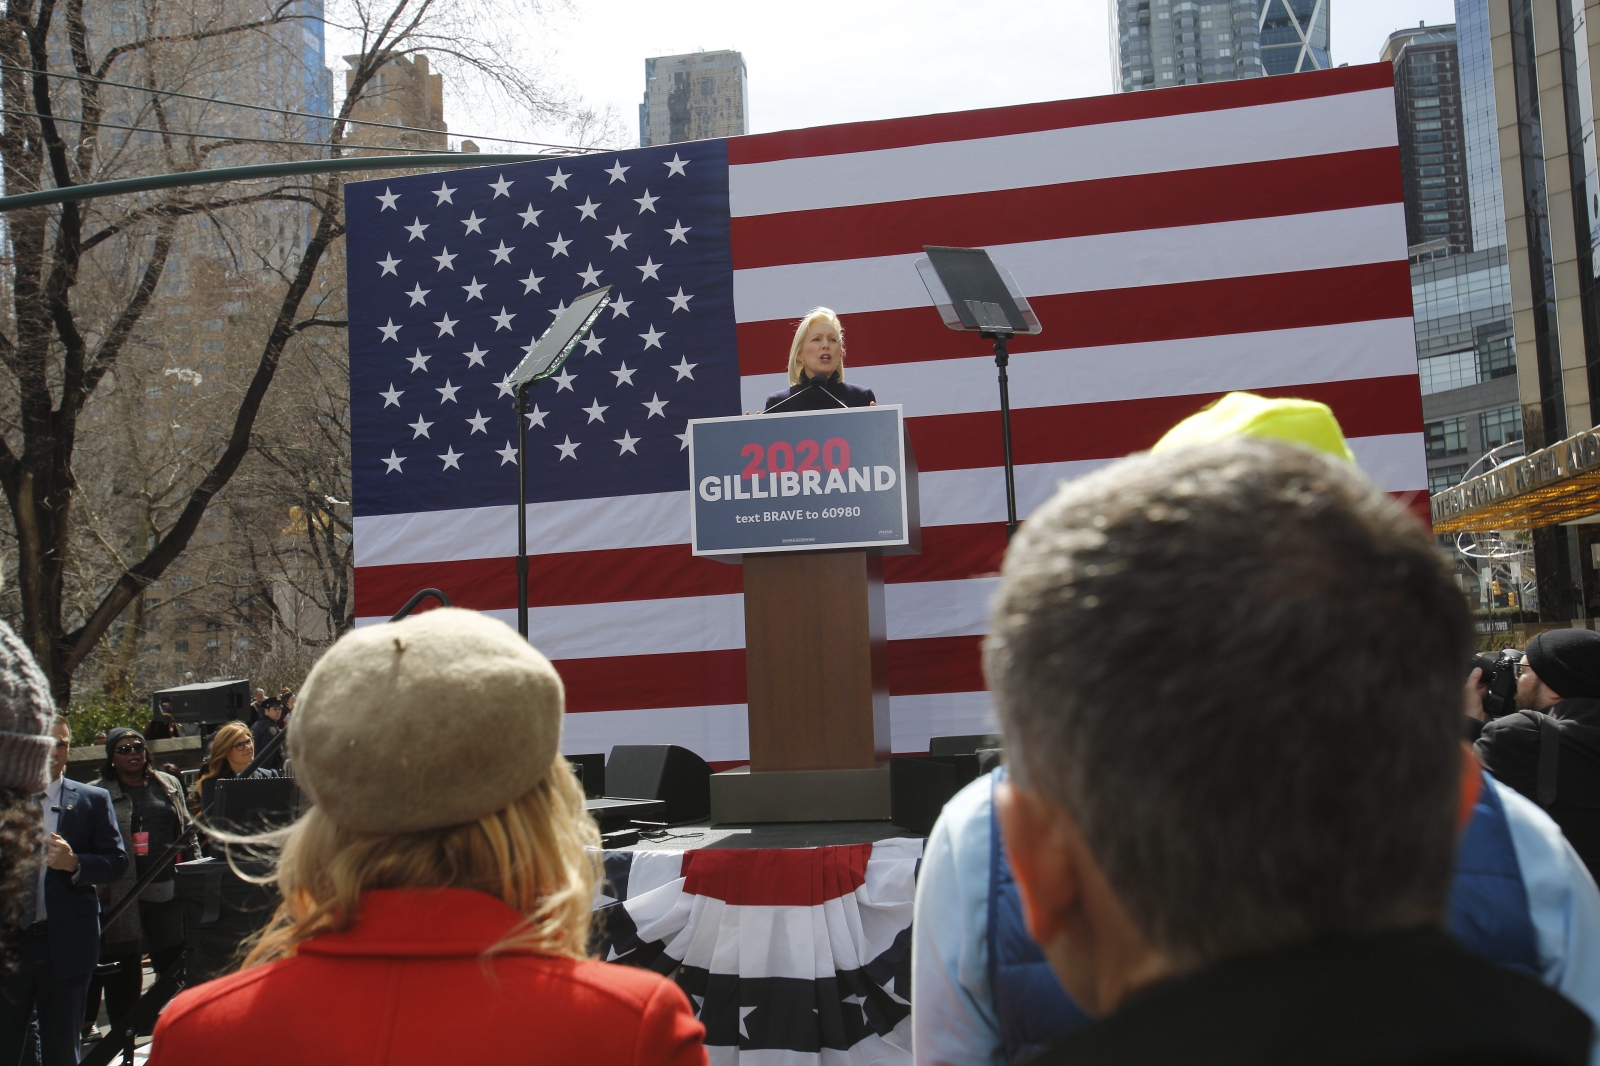 Image from A Time to Stand Up  - United States Senator Kirsten Gillibrand kicks off her...